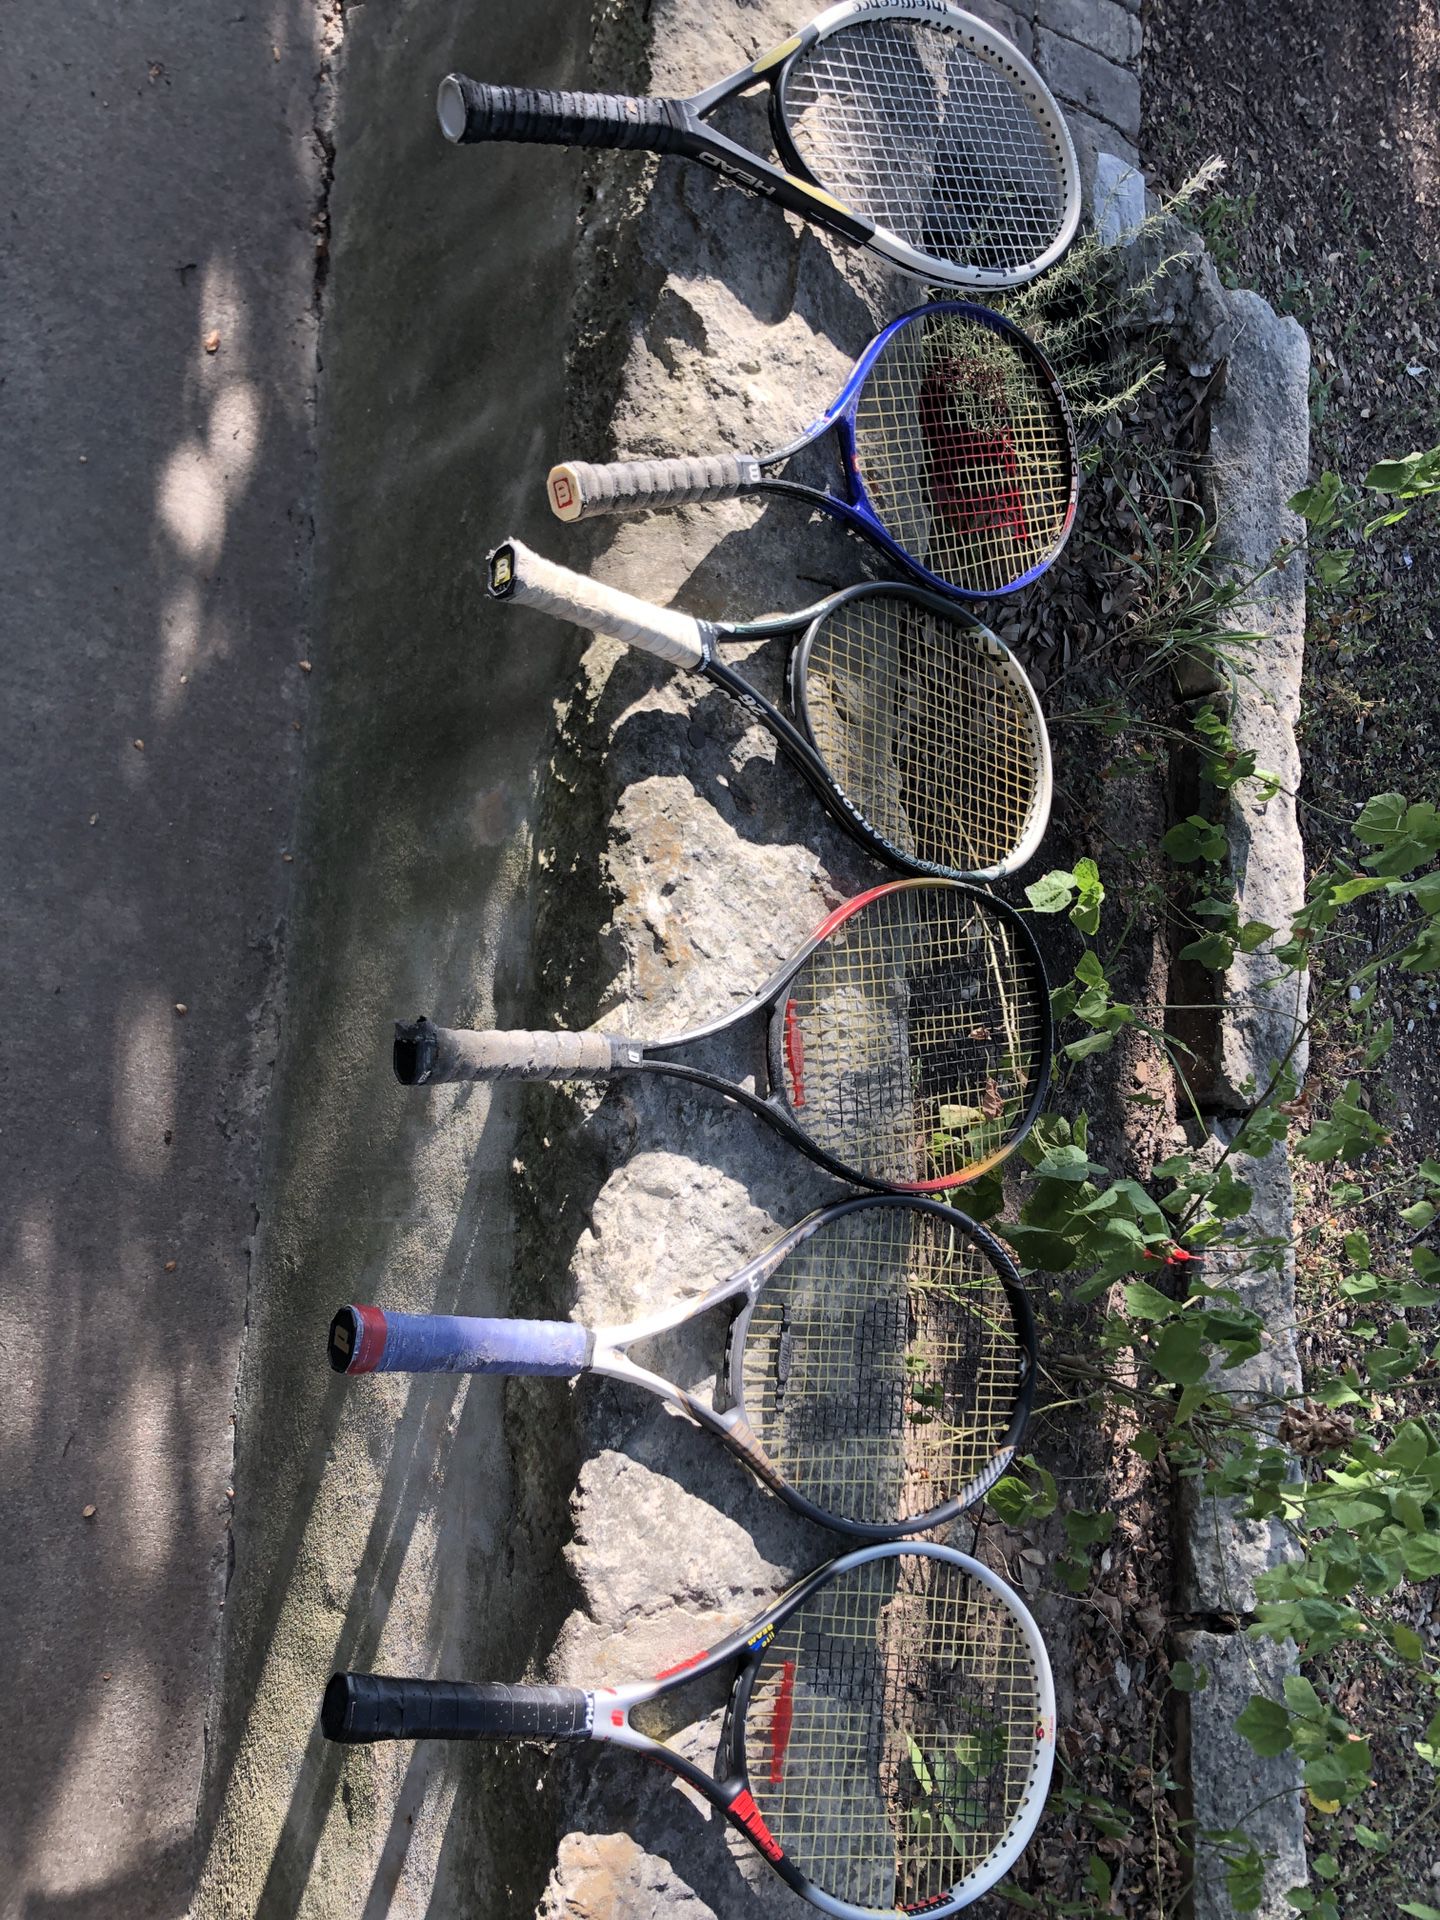 Men’s Tennis Rackets For Sale - $30 each Or 2 For $50